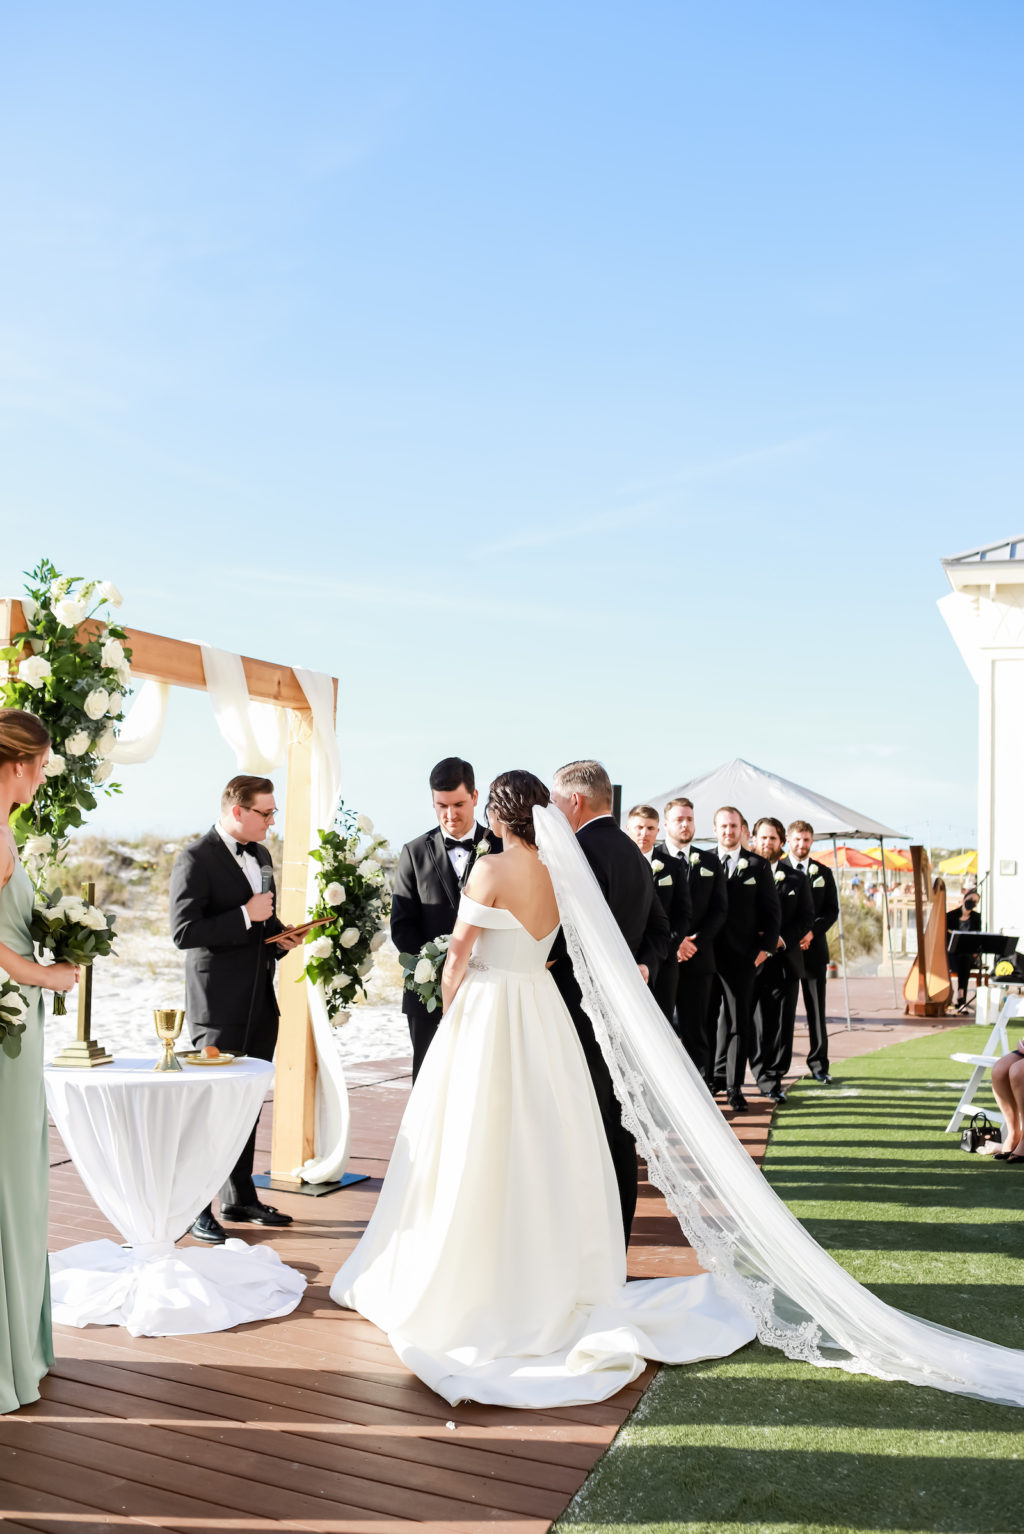 Florida Timeless Bride and Groom Exchanging Wedding Vows on Waterfront Lawn Ceremony at Clearwater Beach Wedding Venue Sandpearl Resort | Tampa Bay Wedding Photographer Lifelong Photography Studio | Wedding Planner Blue Skies Weddings and Events | Wedding Florist Iza's Flowers